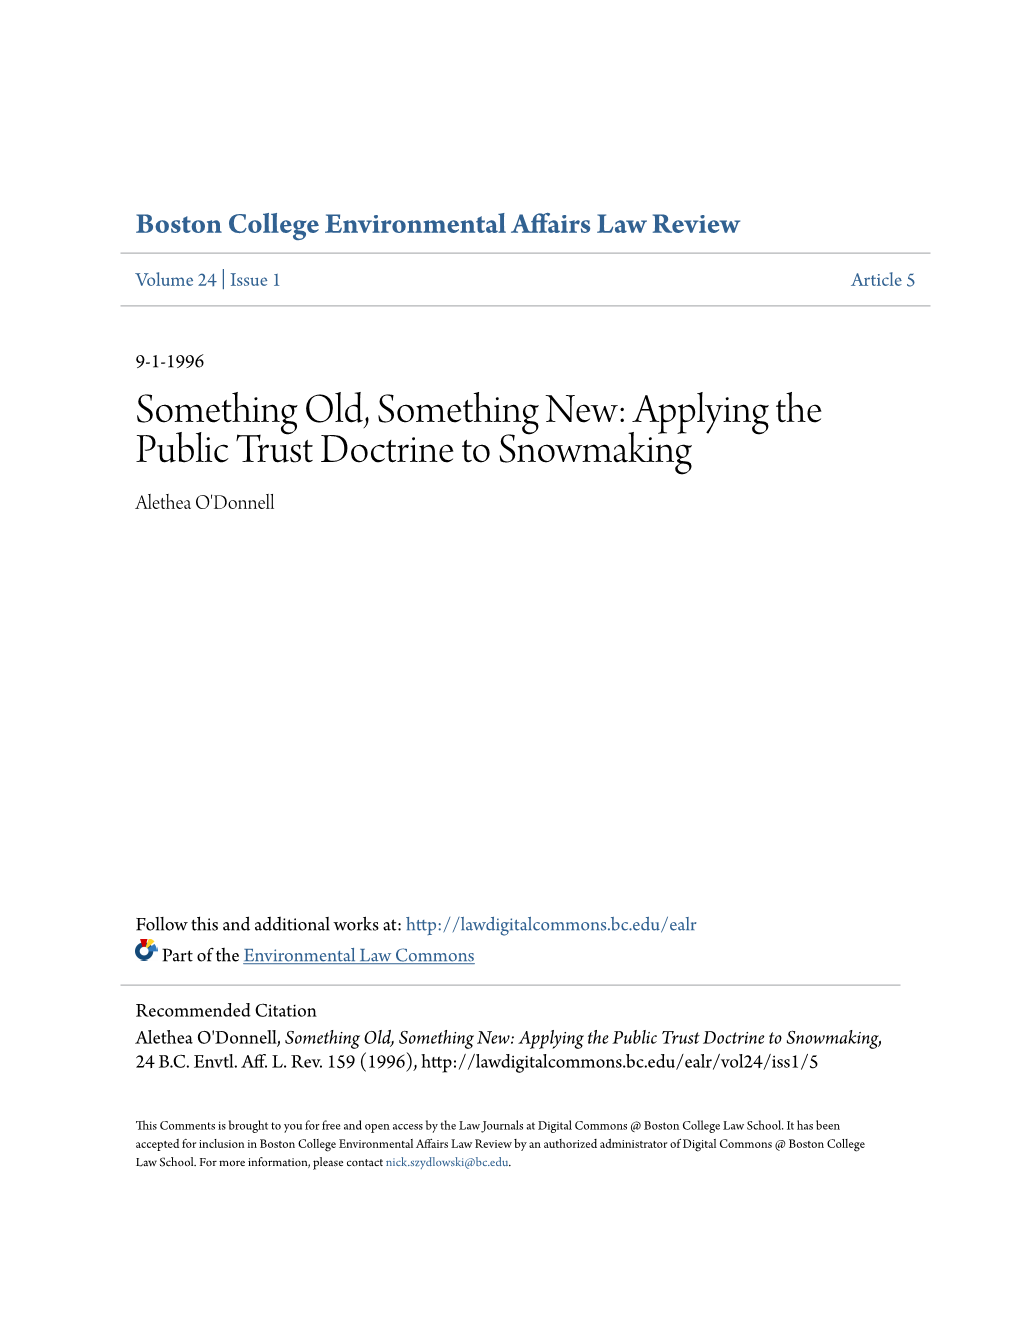 Applying the Public Trust Doctrine to Snowmaking Alethea O'donnell